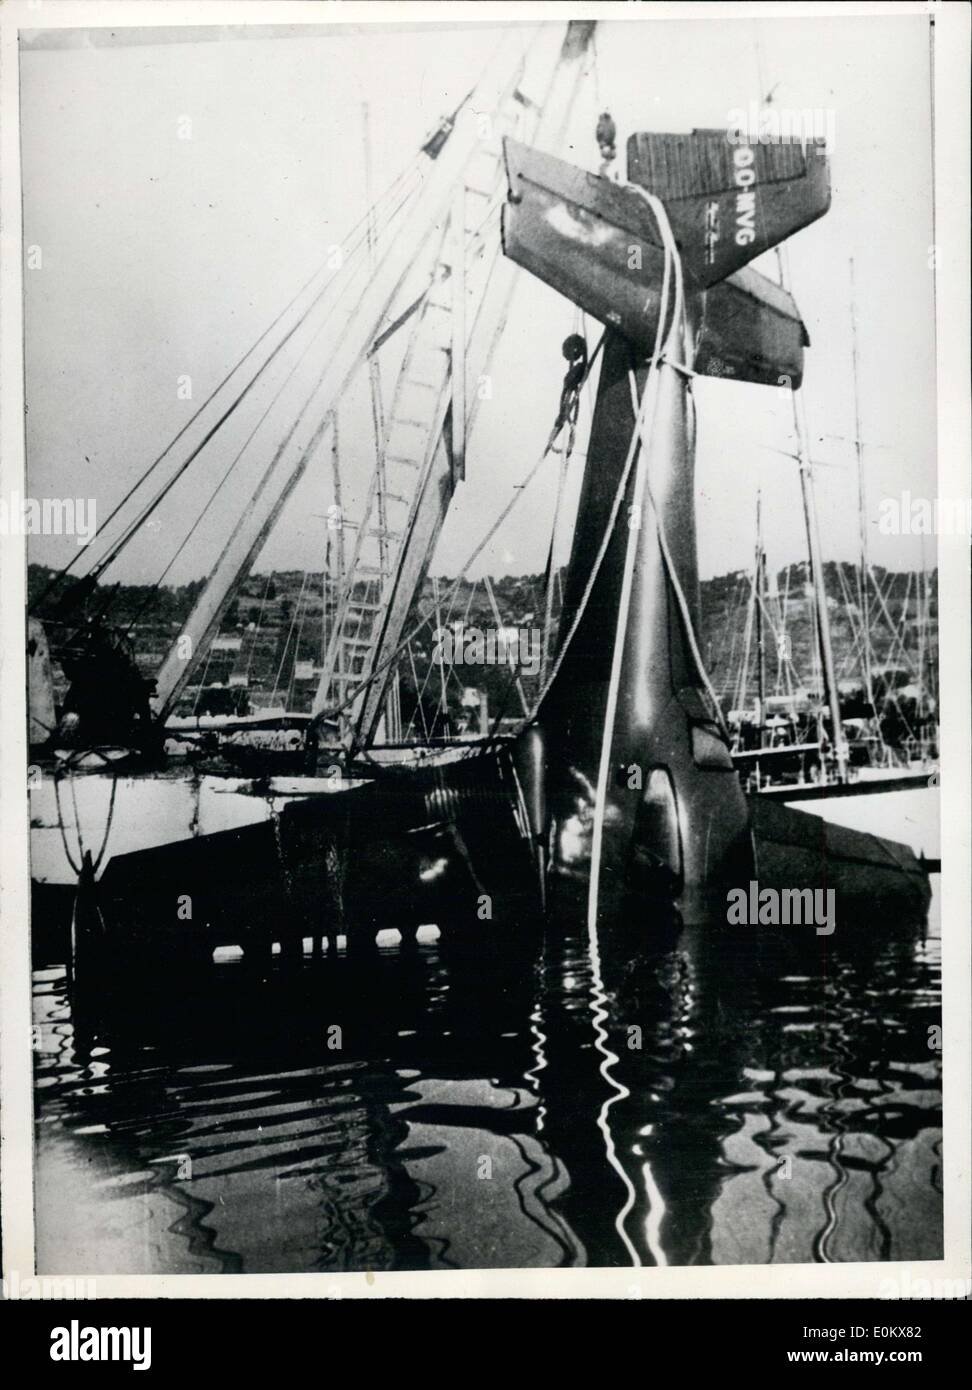 Apr. 22, 1952 - A young Dutchman crashed his plane in the port of Juan-les-Pins, France. Luckily he wasn't harmed. It is seen here being lifted out of the water by a crane. Stock Photo